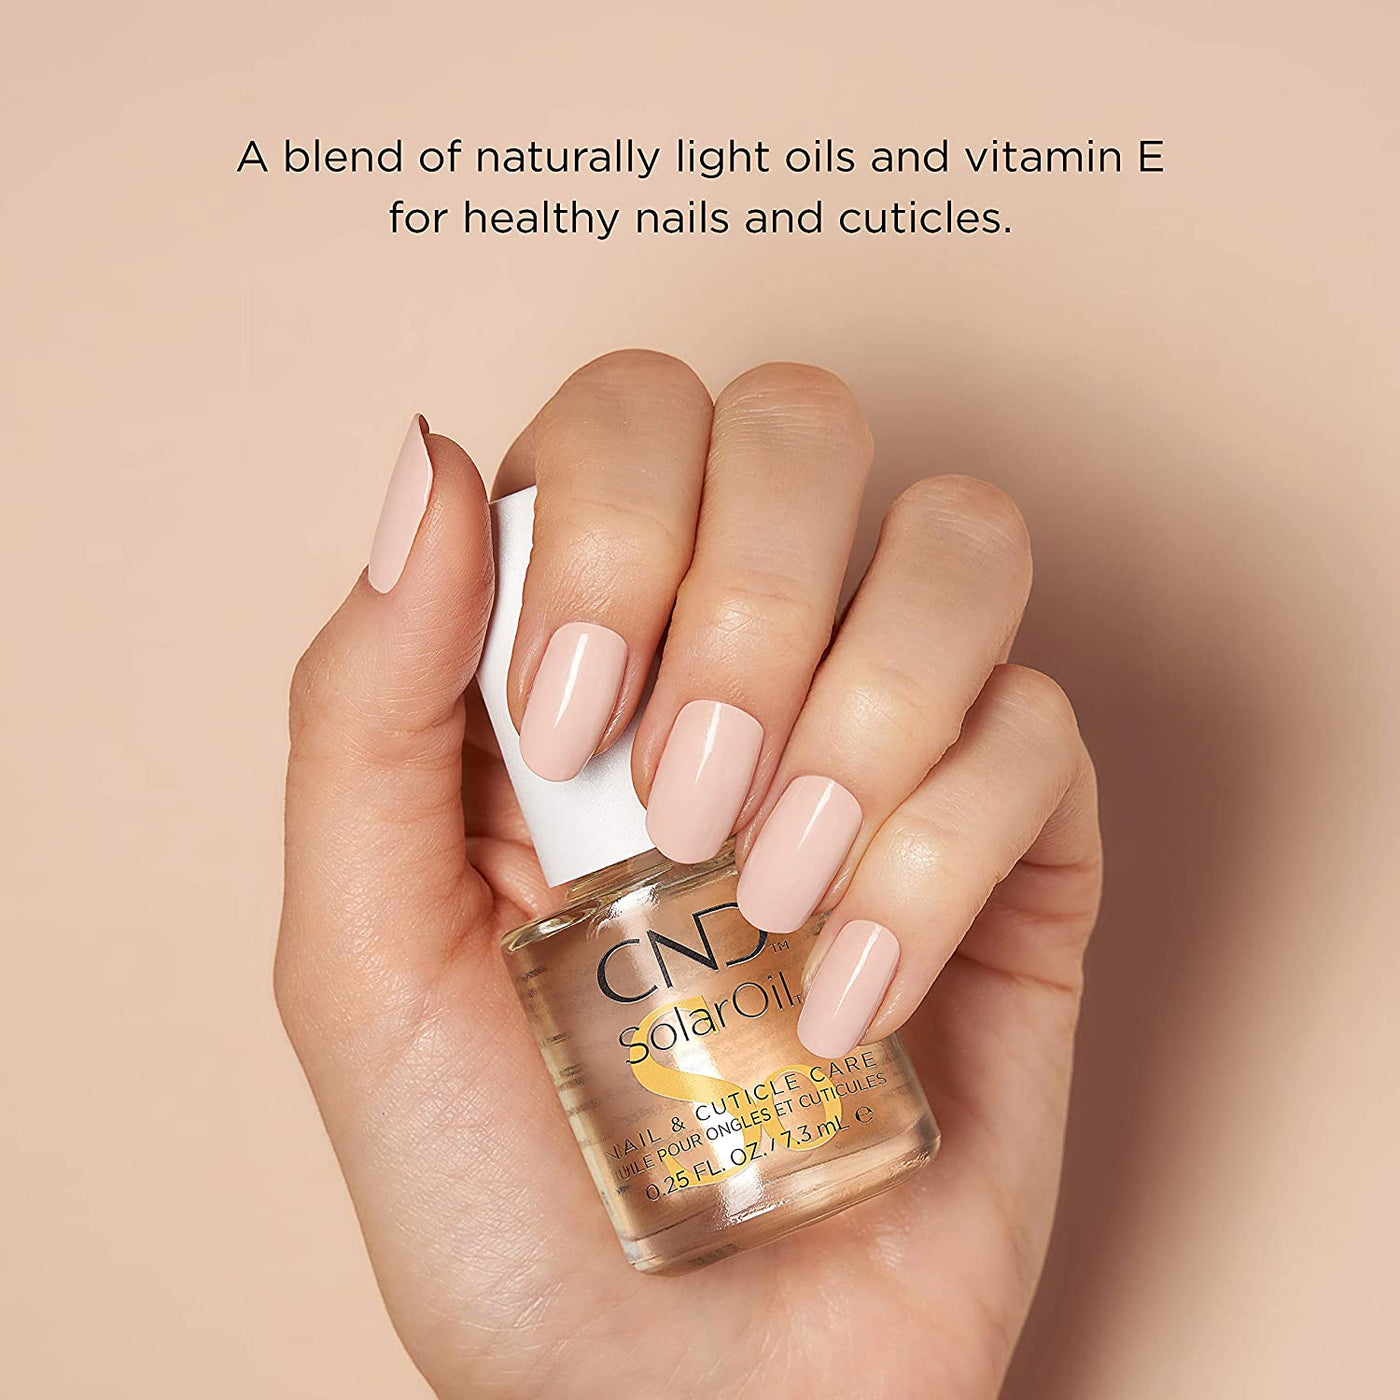 Unlock the Secret: How to Use CND SolarOil for Gorgeous Nails?